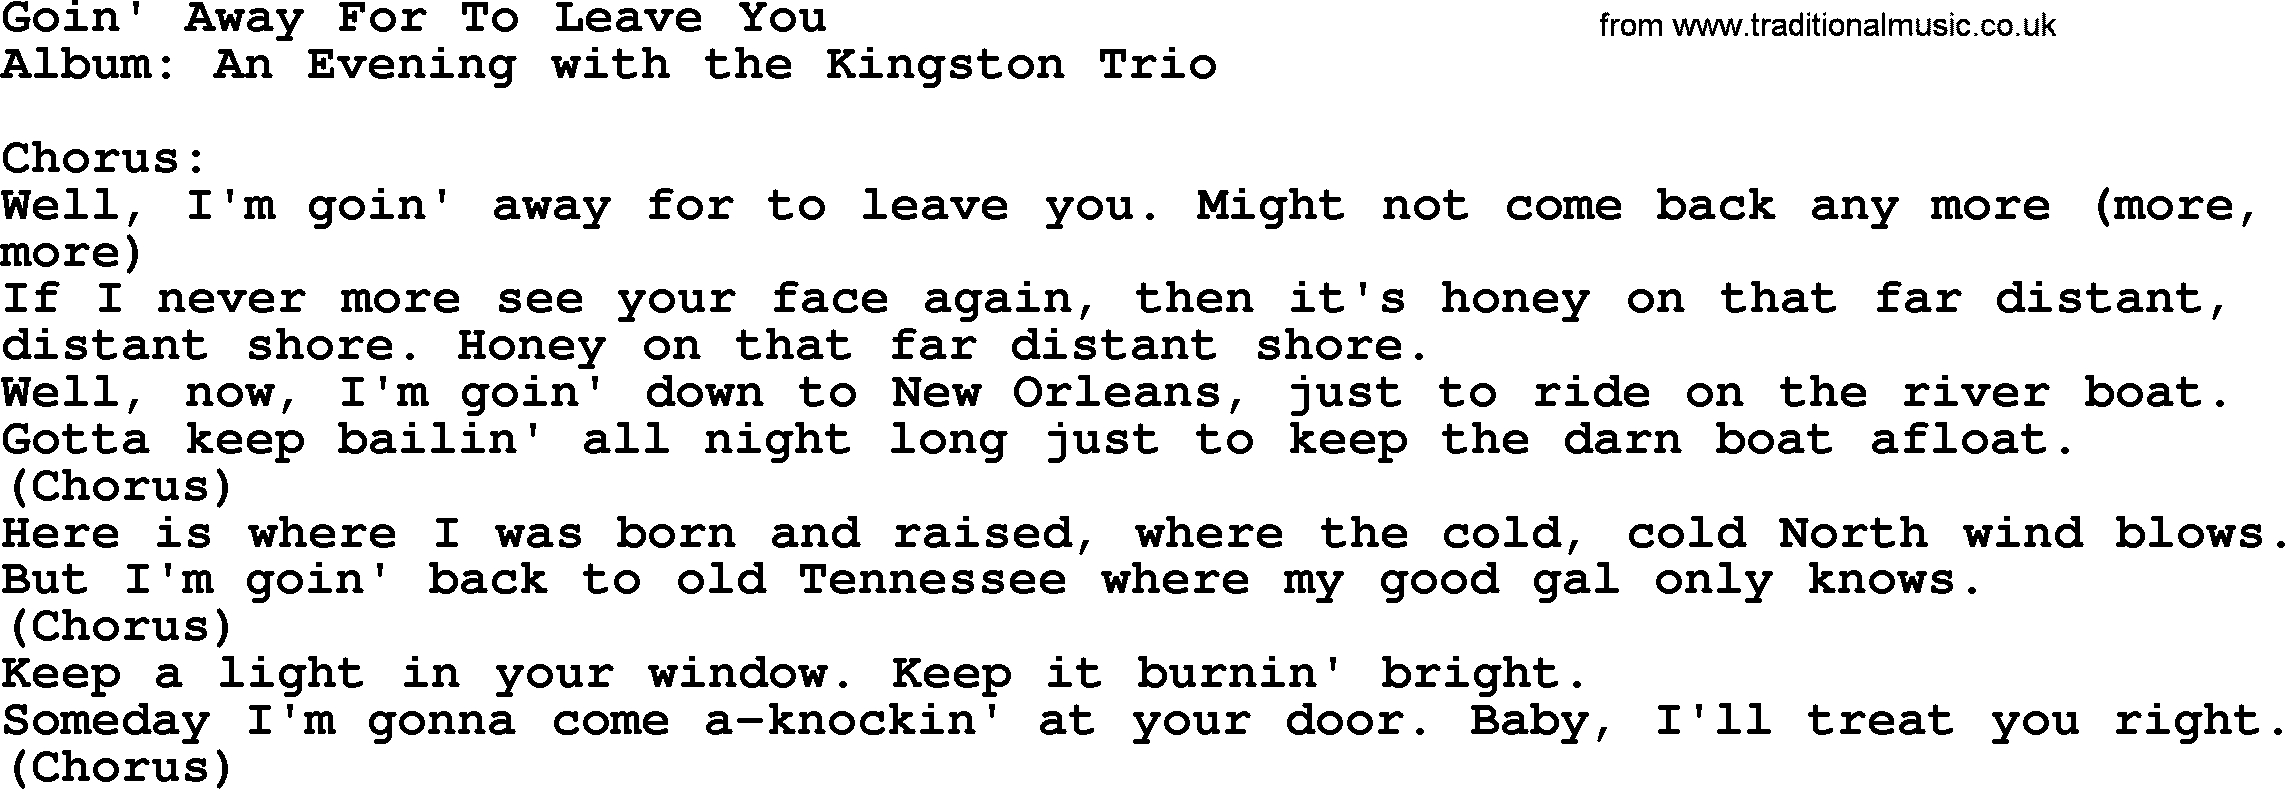 Kingston Trio song Goin' Away For To Leave You, lyrics